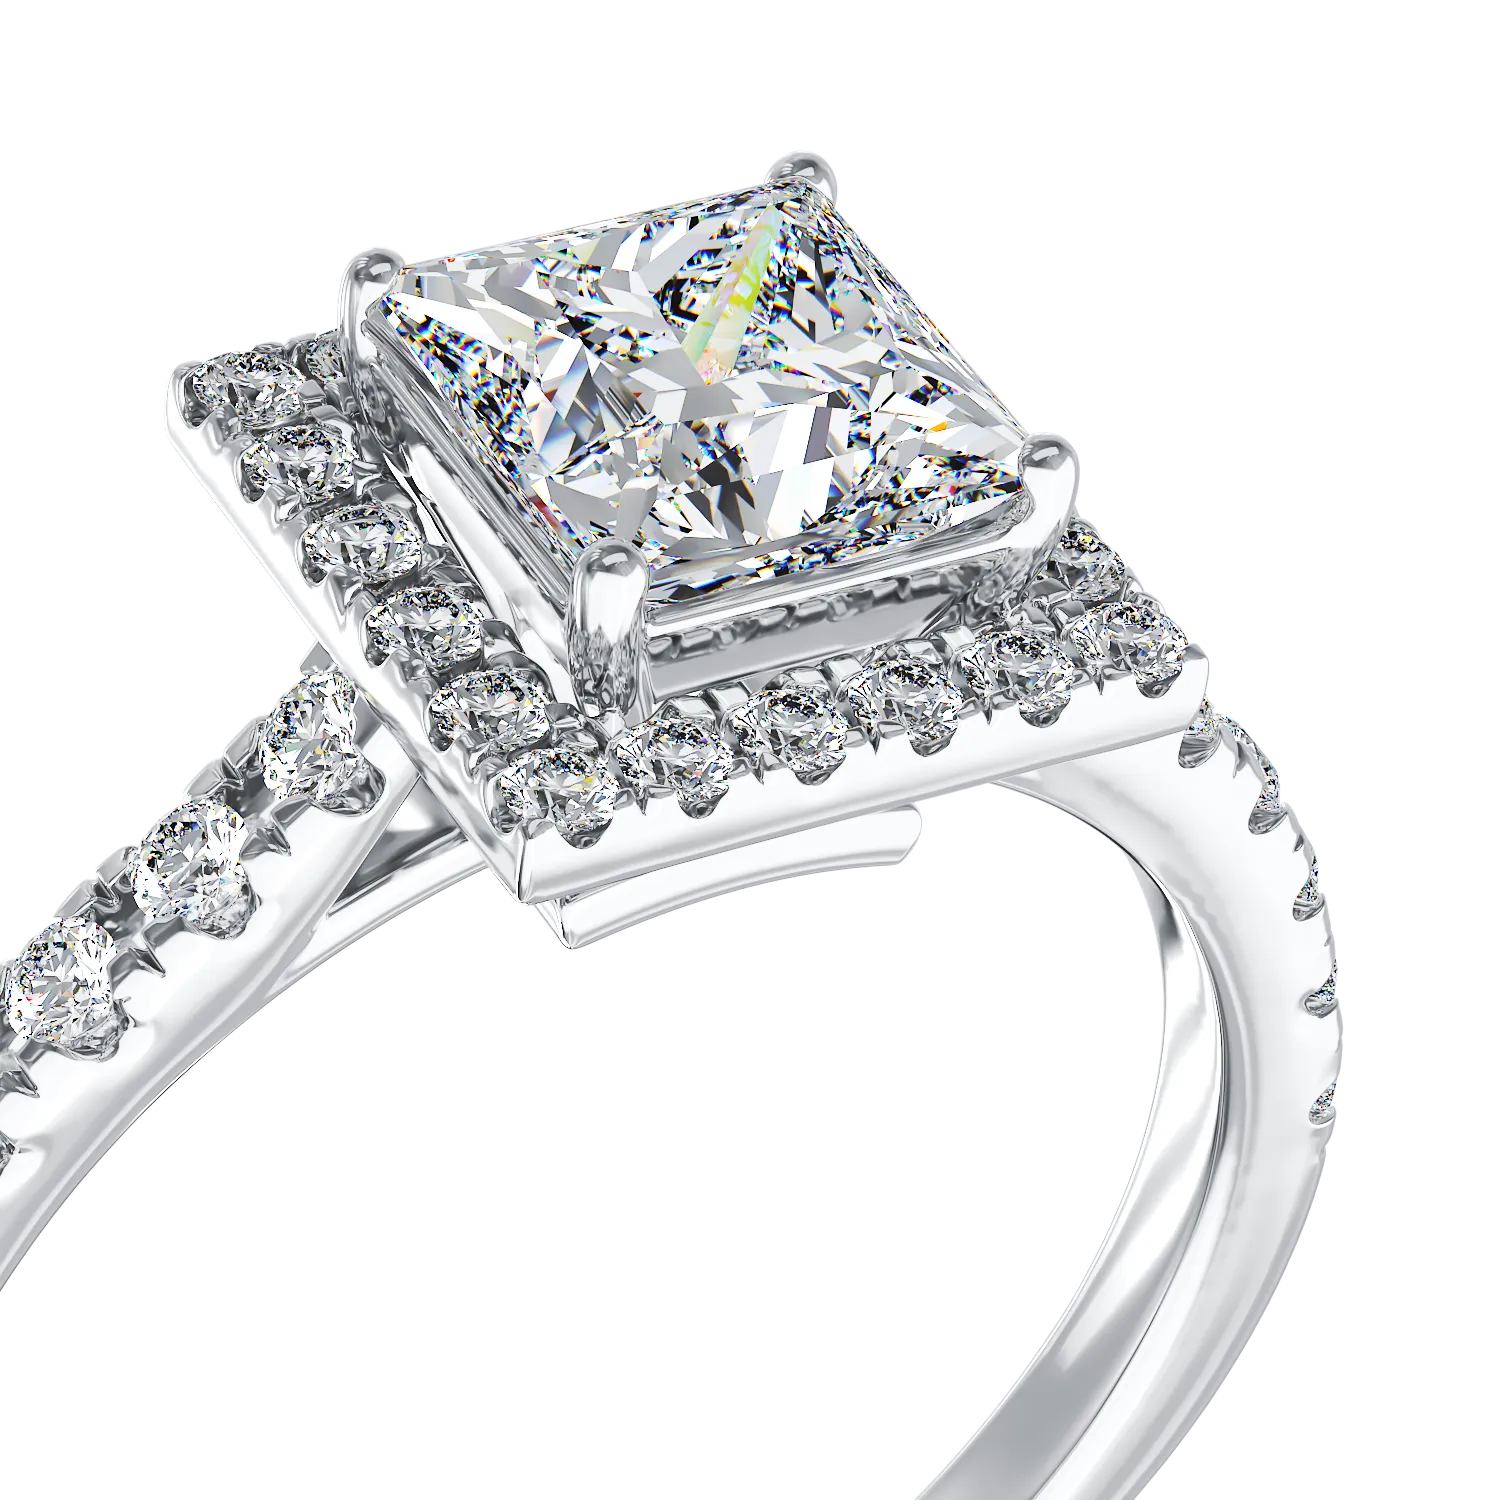 18K white gold engagement ring with 0.8ct diamond and 0.38ct diamonds